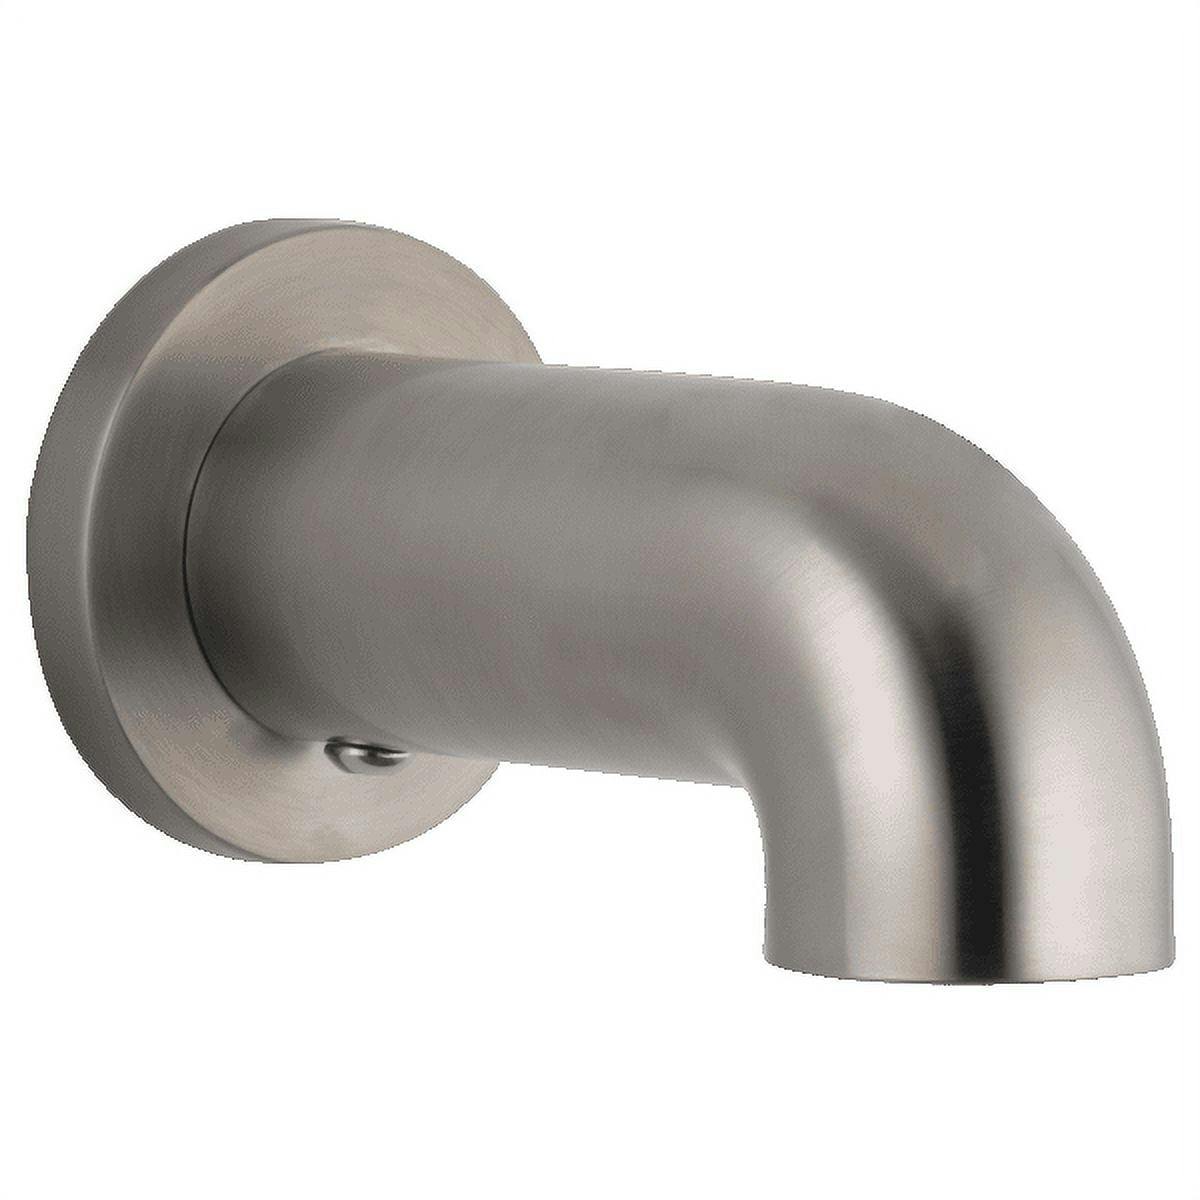 Contemporary Stainless Steel Wall Mounted Tub Spout Trim 7" Reach